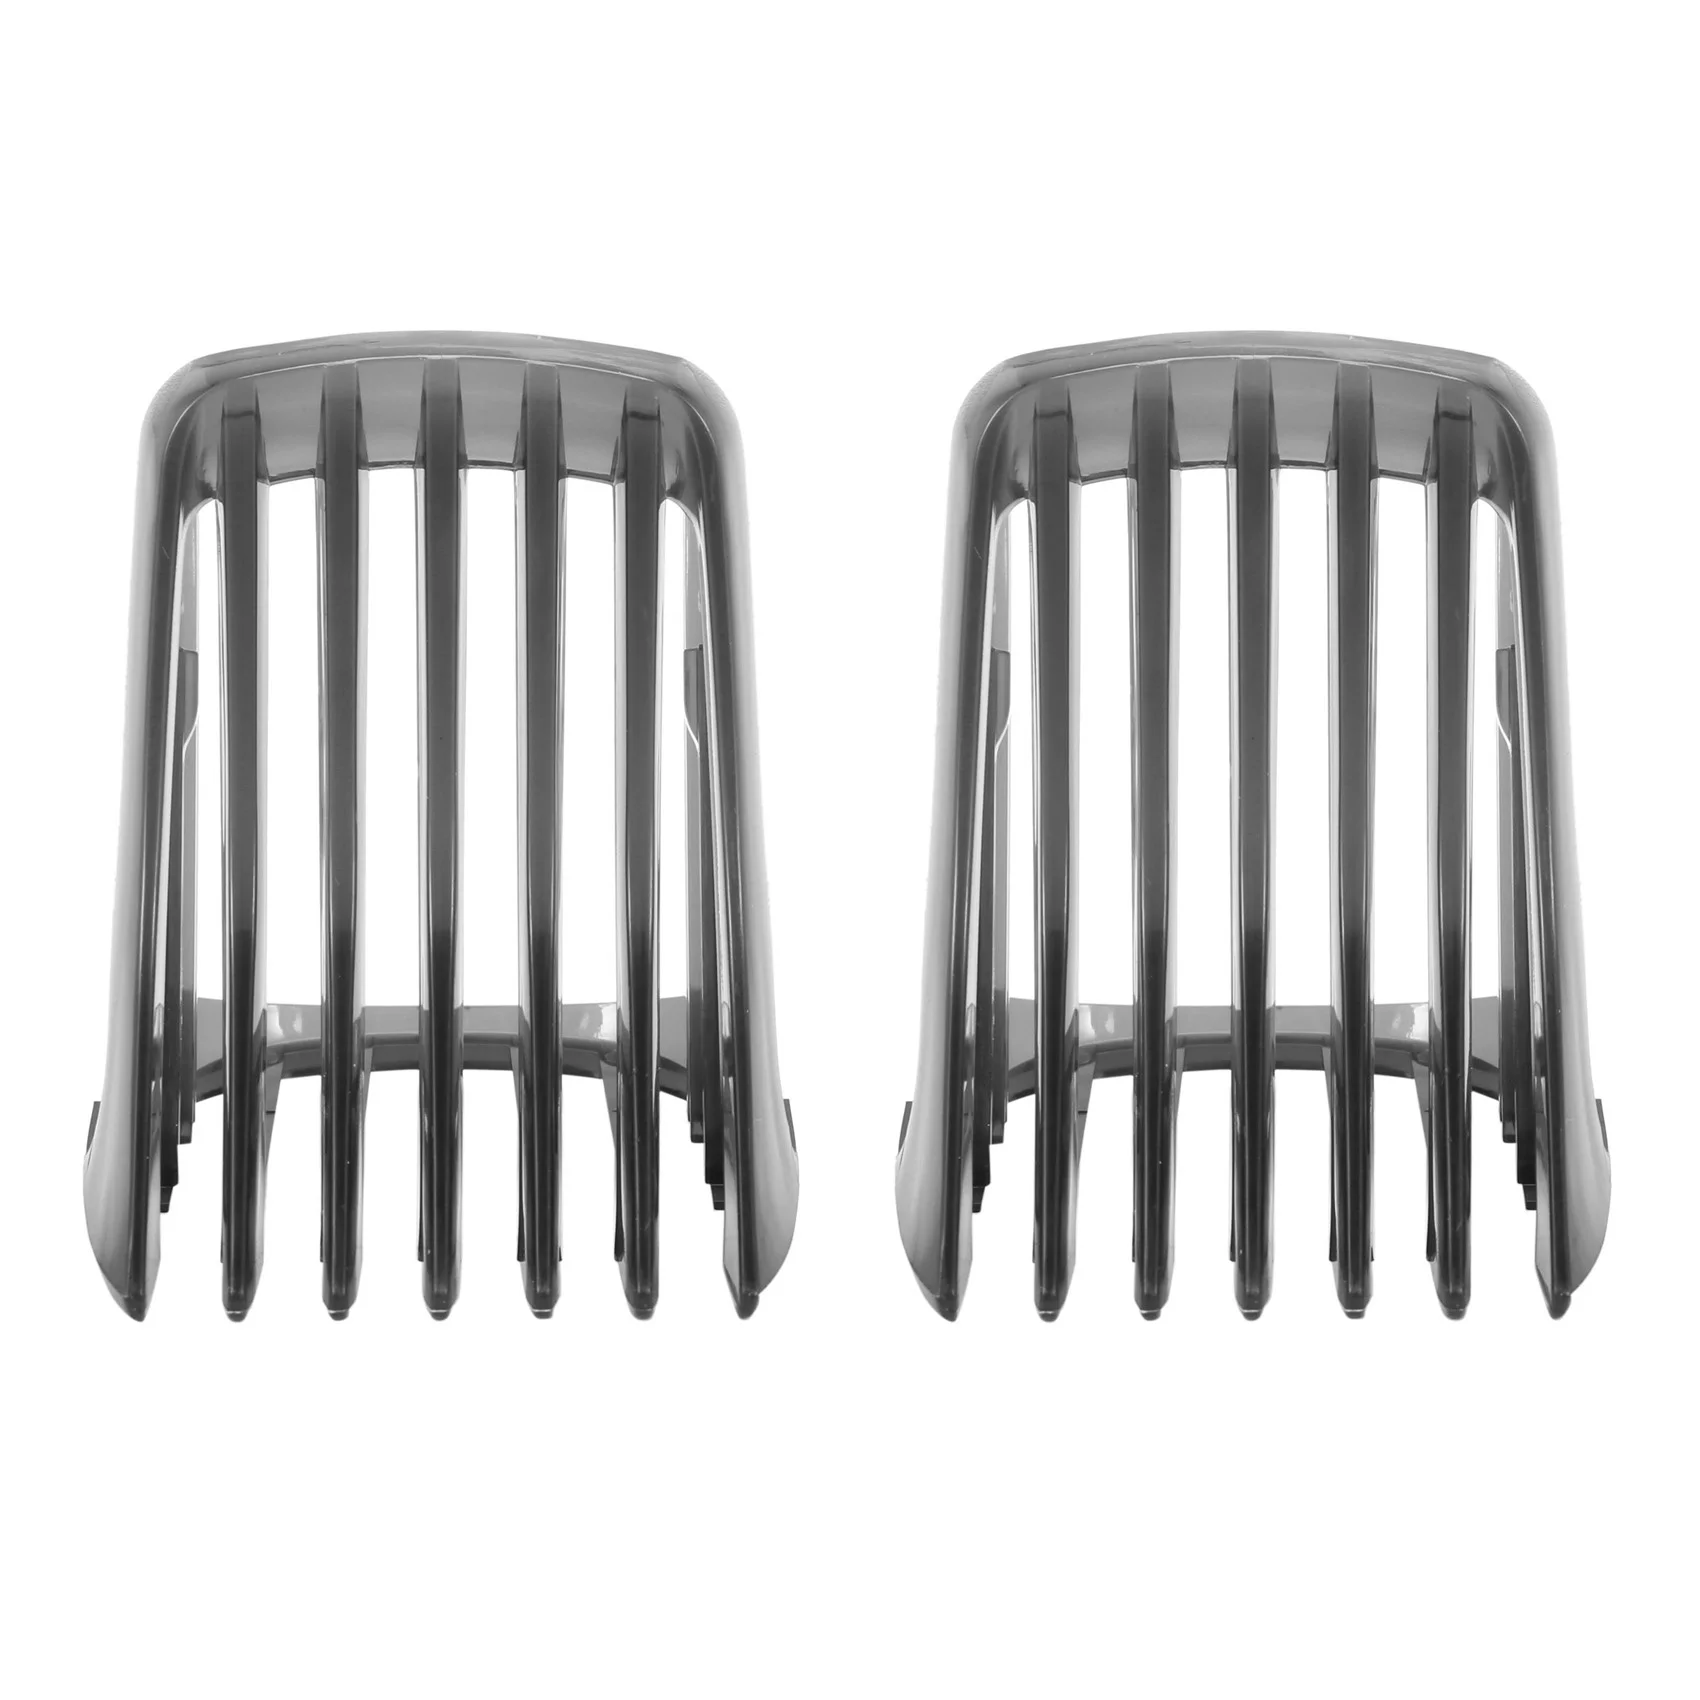 

2X Limit Comb Replacement Combs Trimmer Head Limit Comb for Philips Hair Clipper HC3400 HC3410 HC5440 HC5442 HC5450